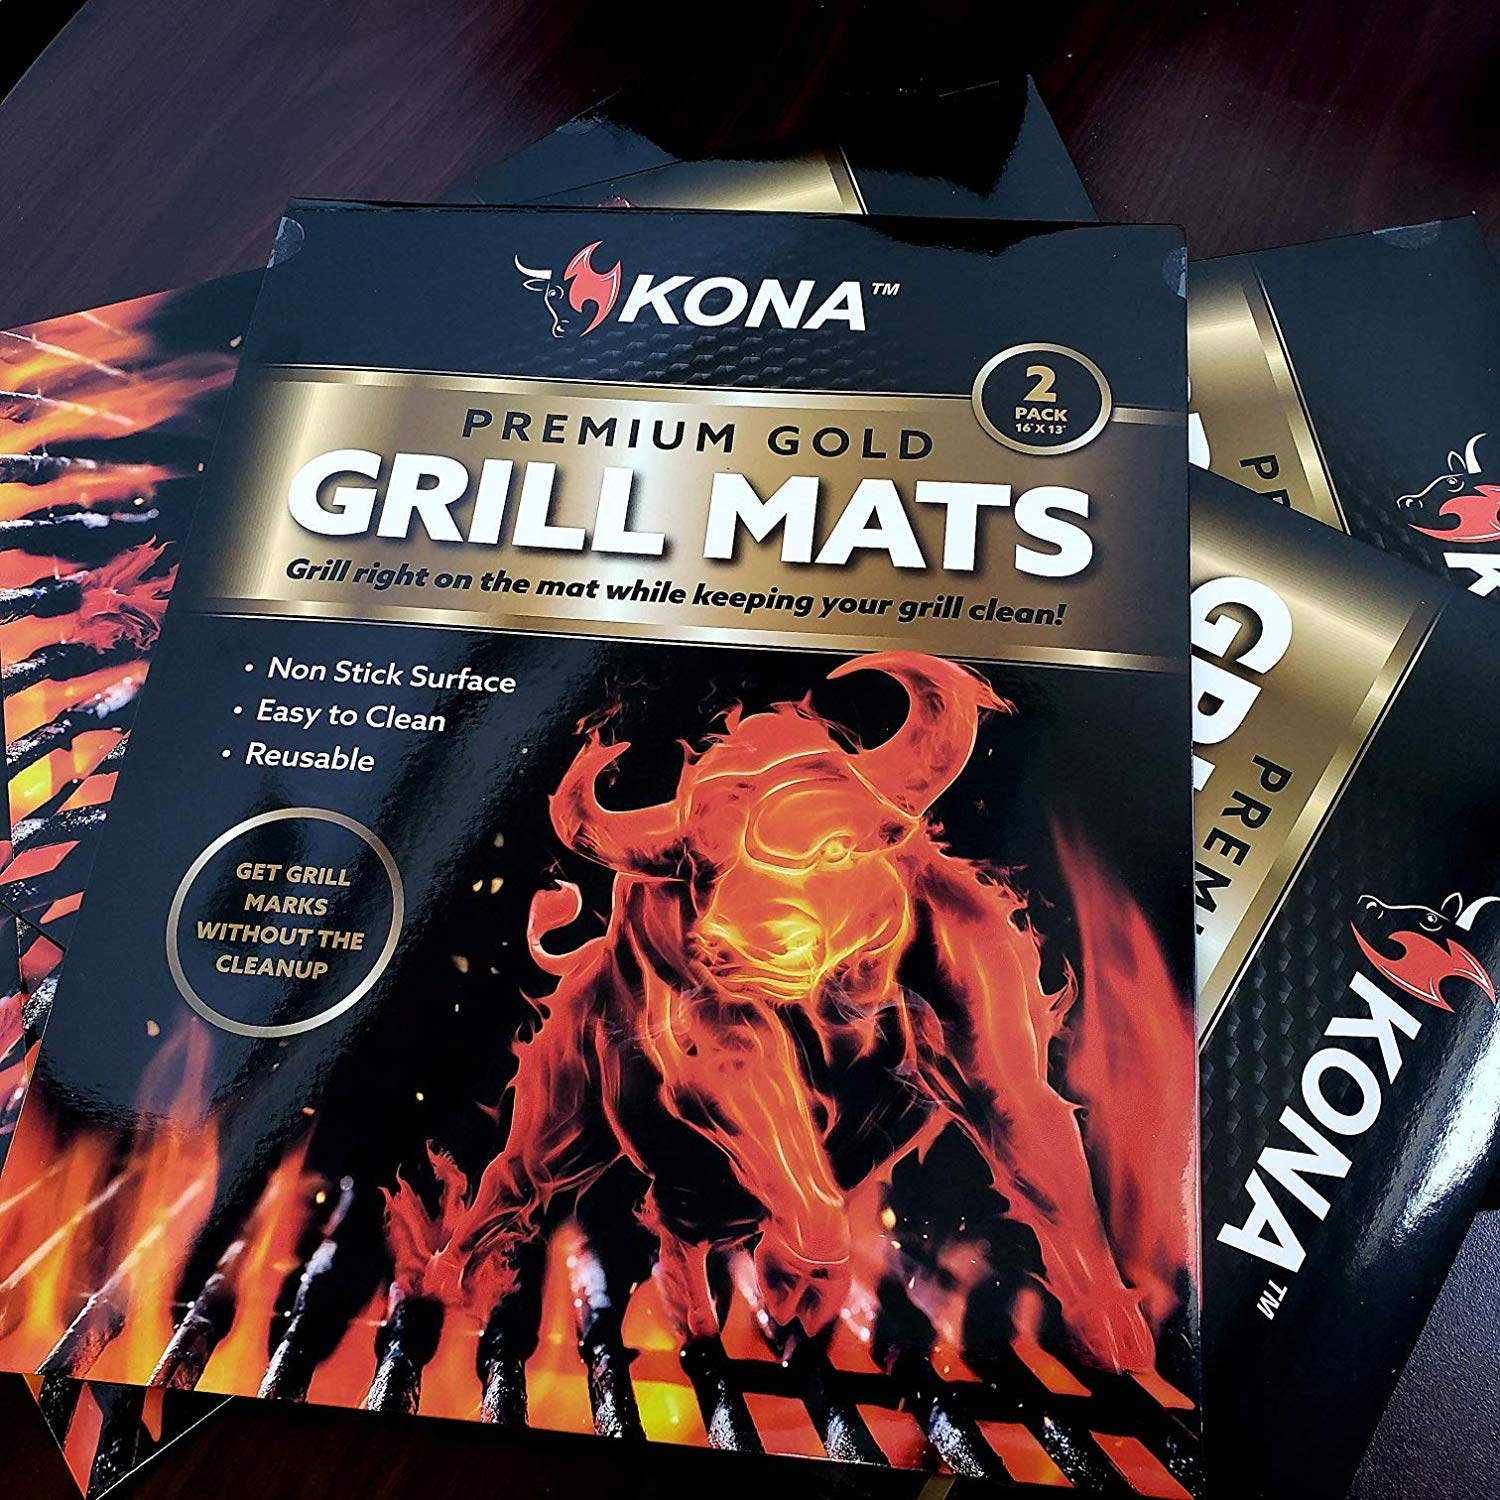 Kona Copper Grill Mats Non Stick BBQ and Oven Sheets Set of 2, 16"x13" - image 4 of 7